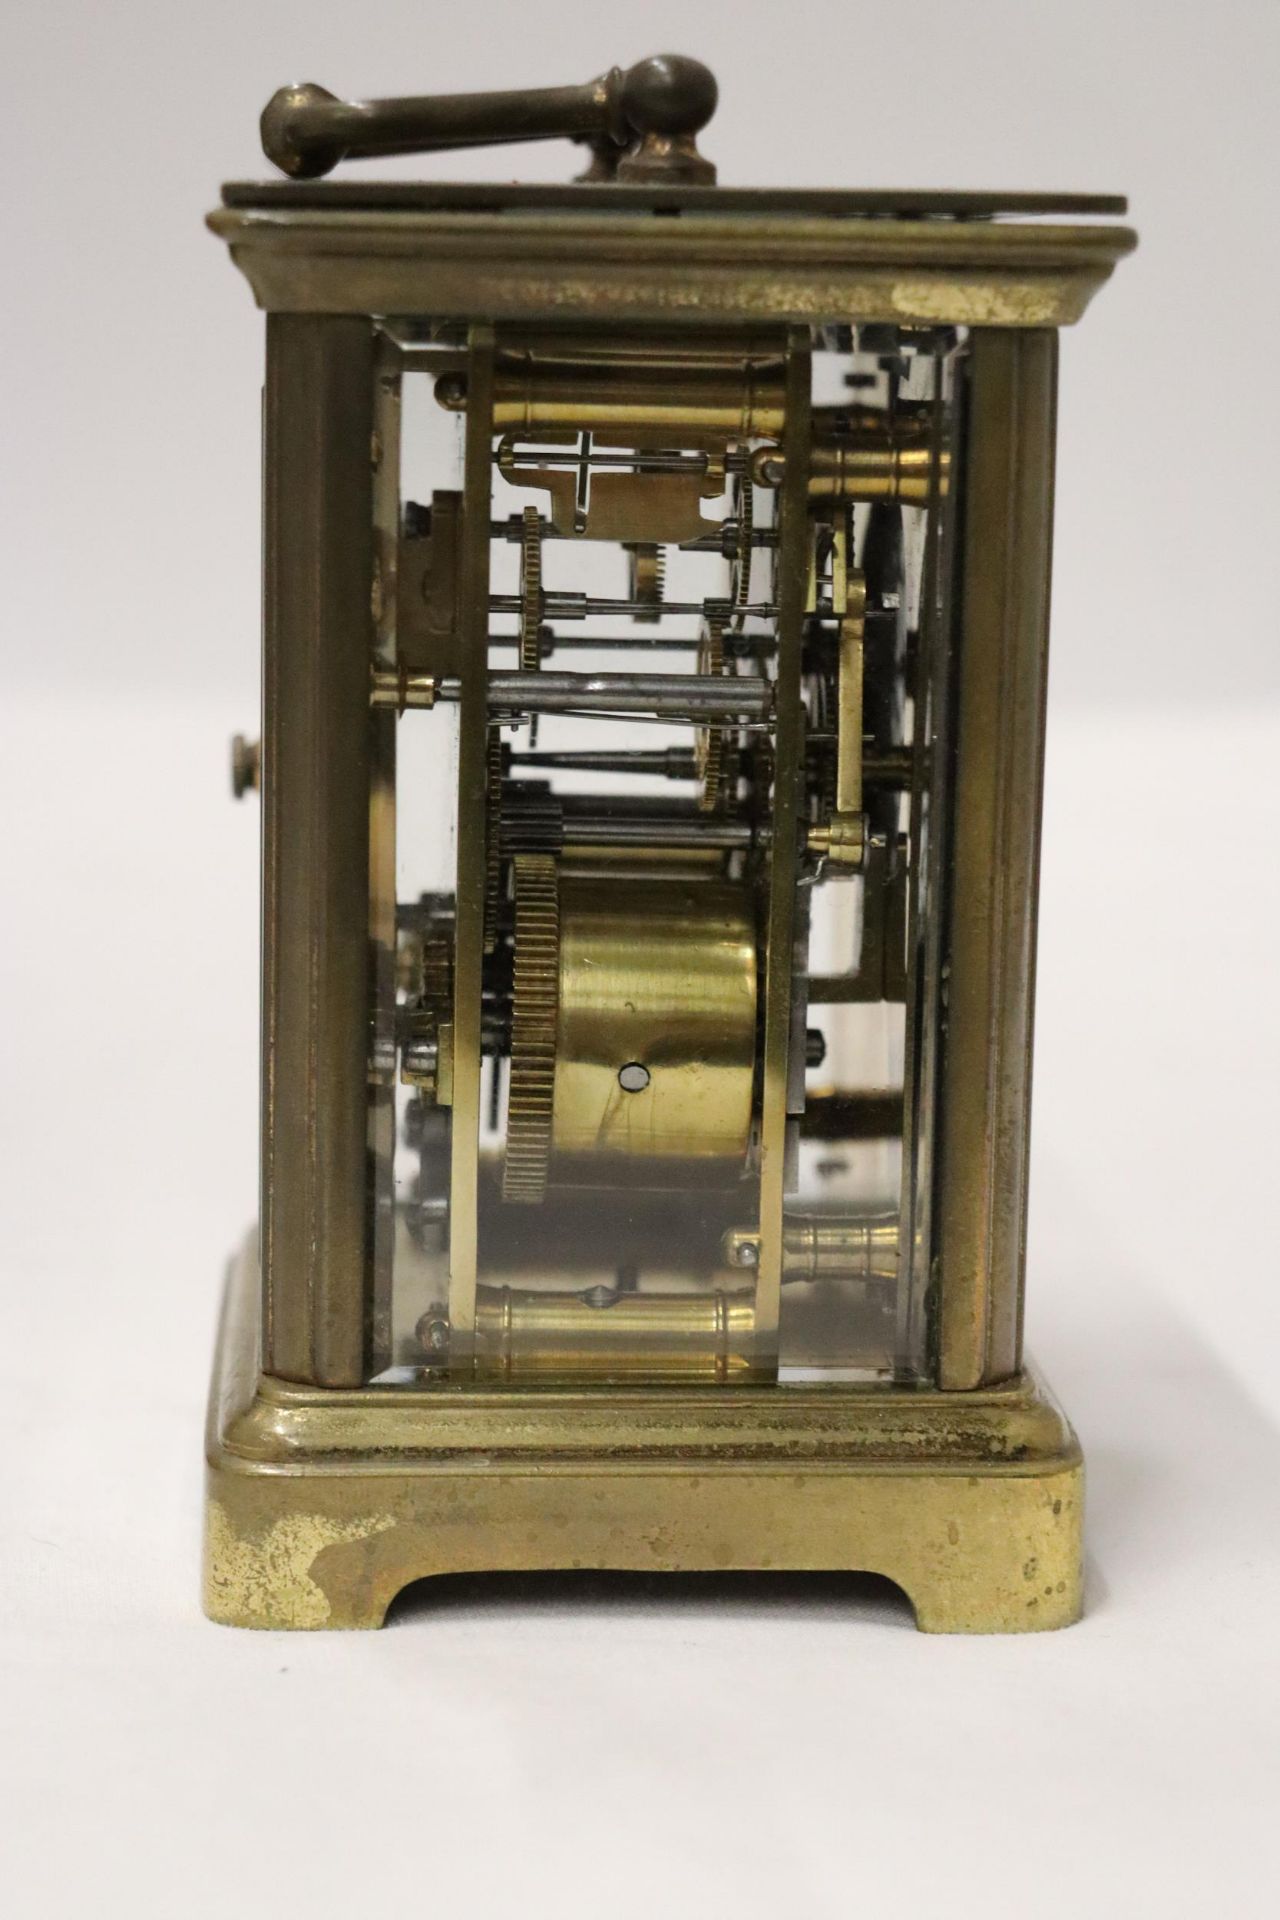 A VINTAGE BRASS ALARM CLOCK WITH GLASS SIDES TO SHOW INNER WORKINGS, IN A LEATHER CASE - Image 5 of 11